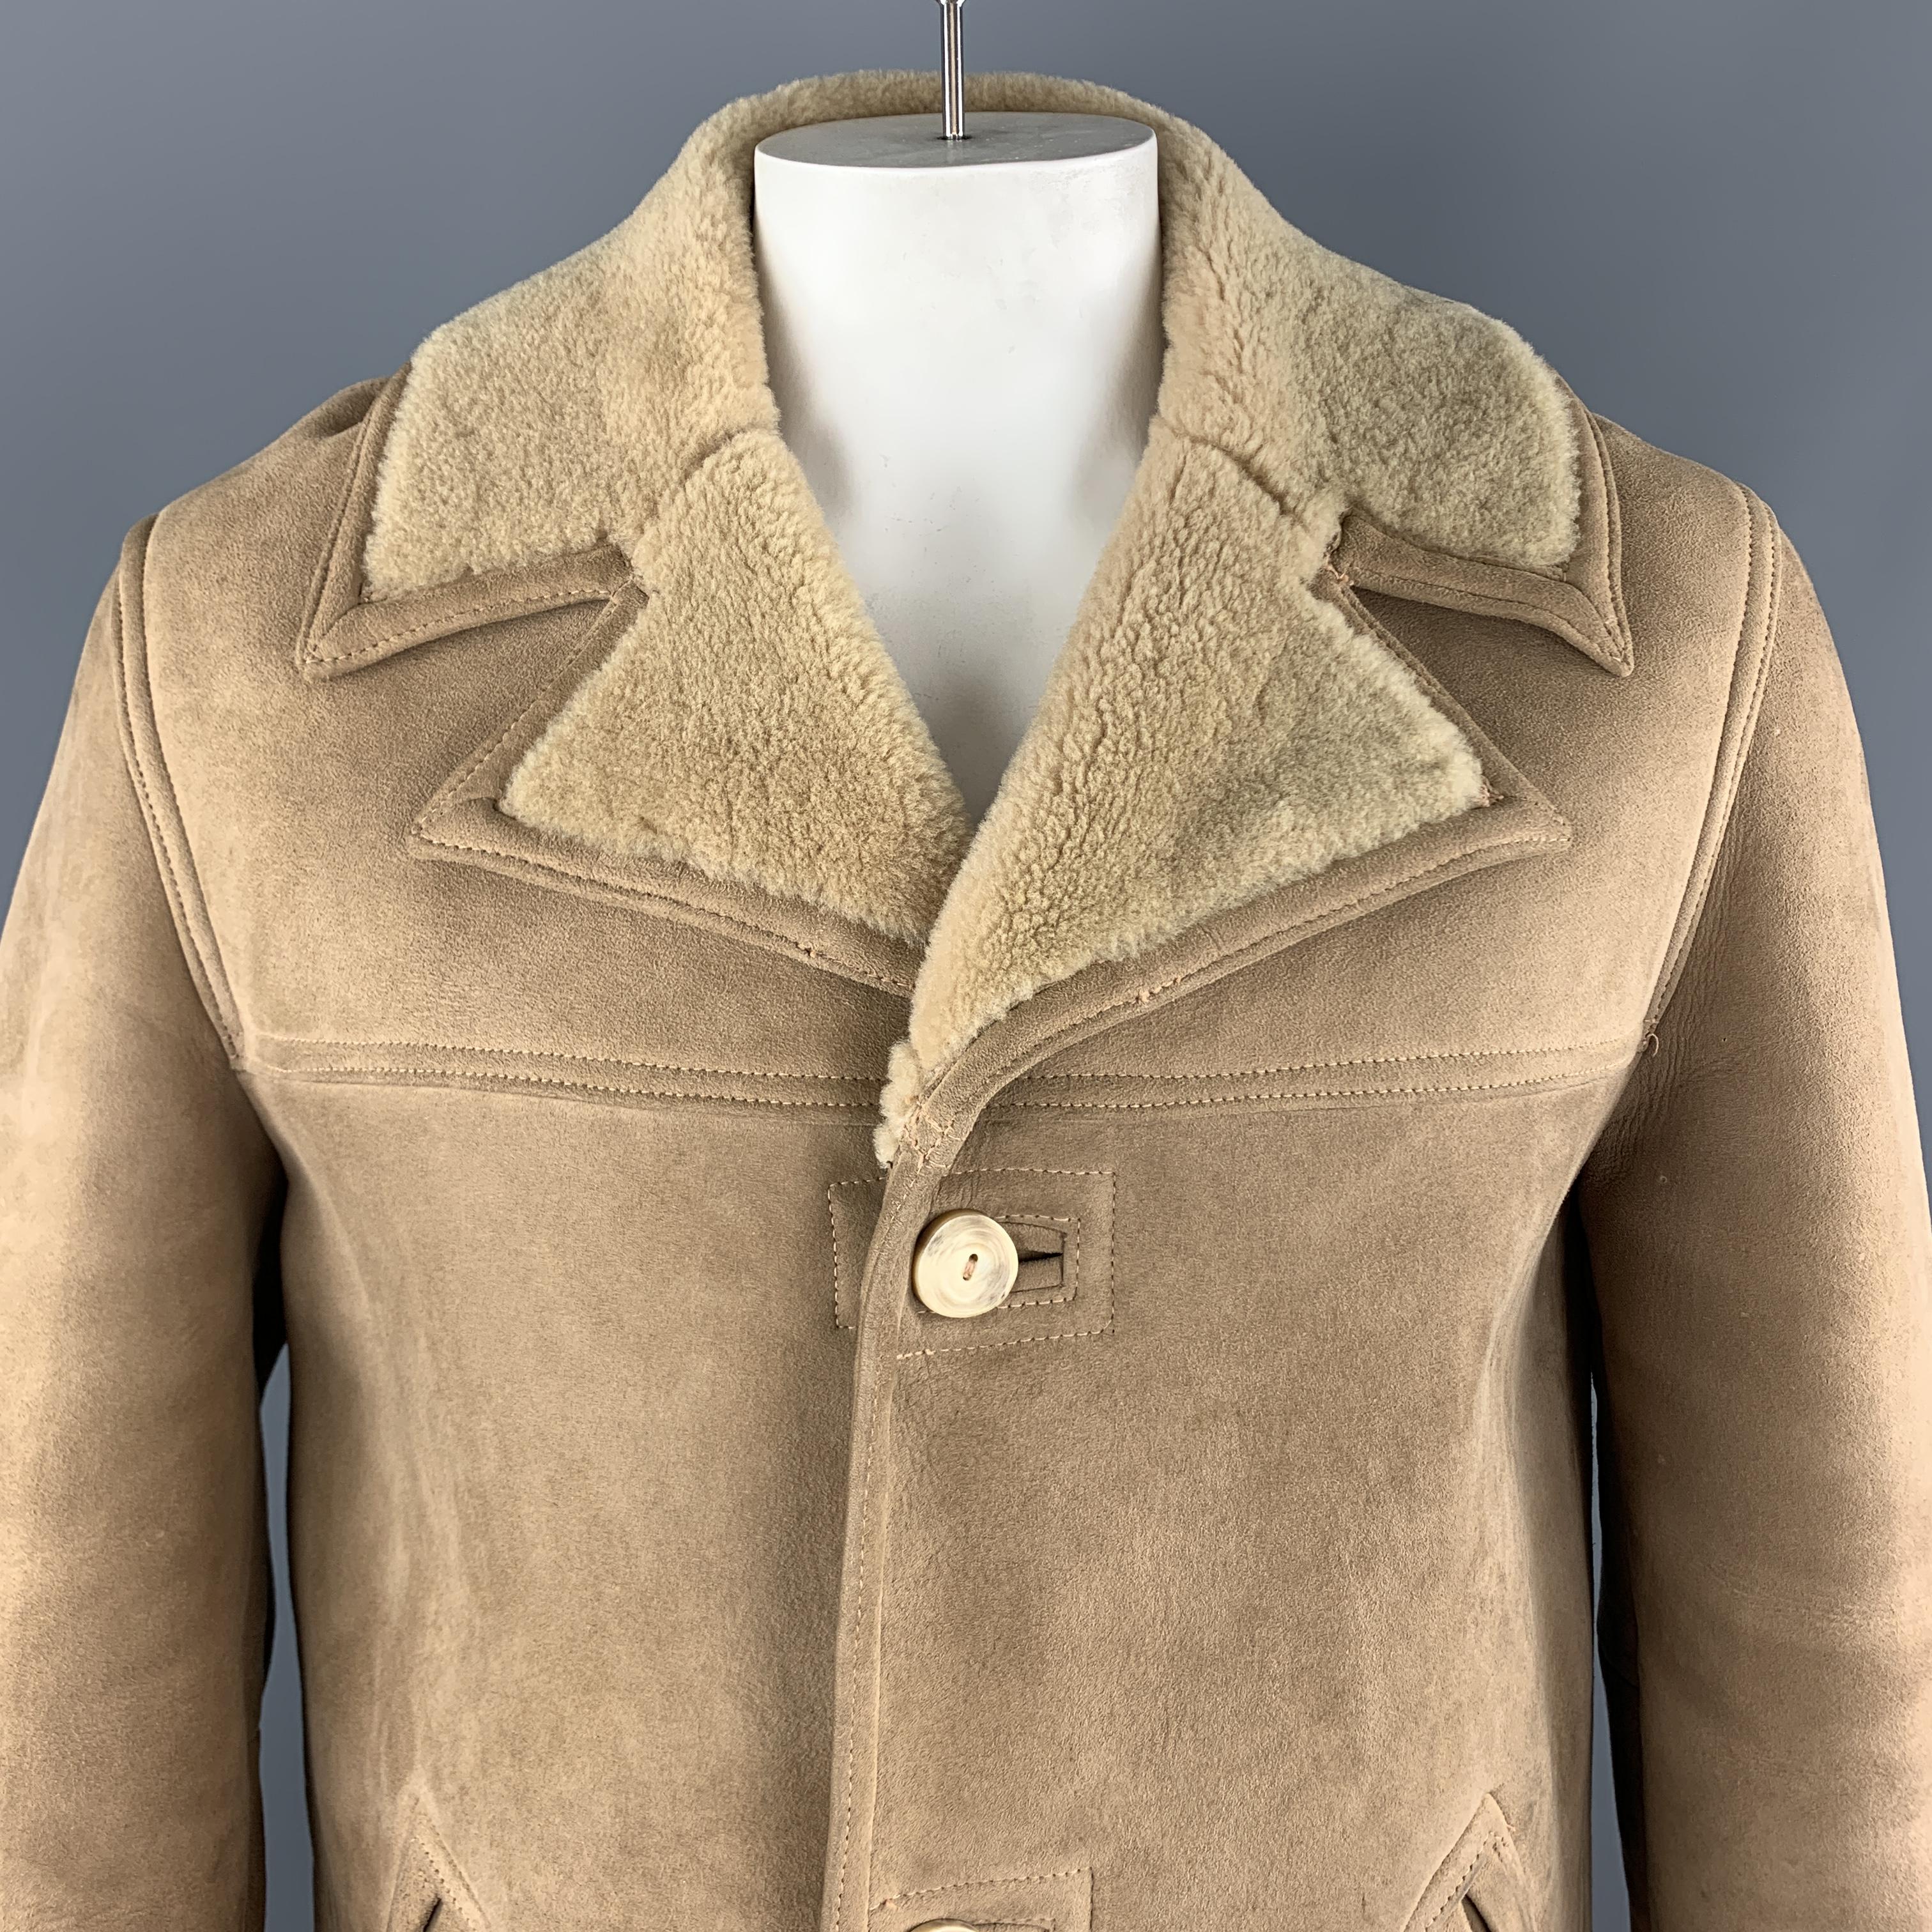 PAUL STUART Coat comes in a tan shearling material, with a contrast notch lapel, three buttons at closure, single breasted, patch pockets, and a single vent at back, unlined. 

Excellent Pre-Owned Condition.
Marked: US 40

Measurements:

Shoulder: